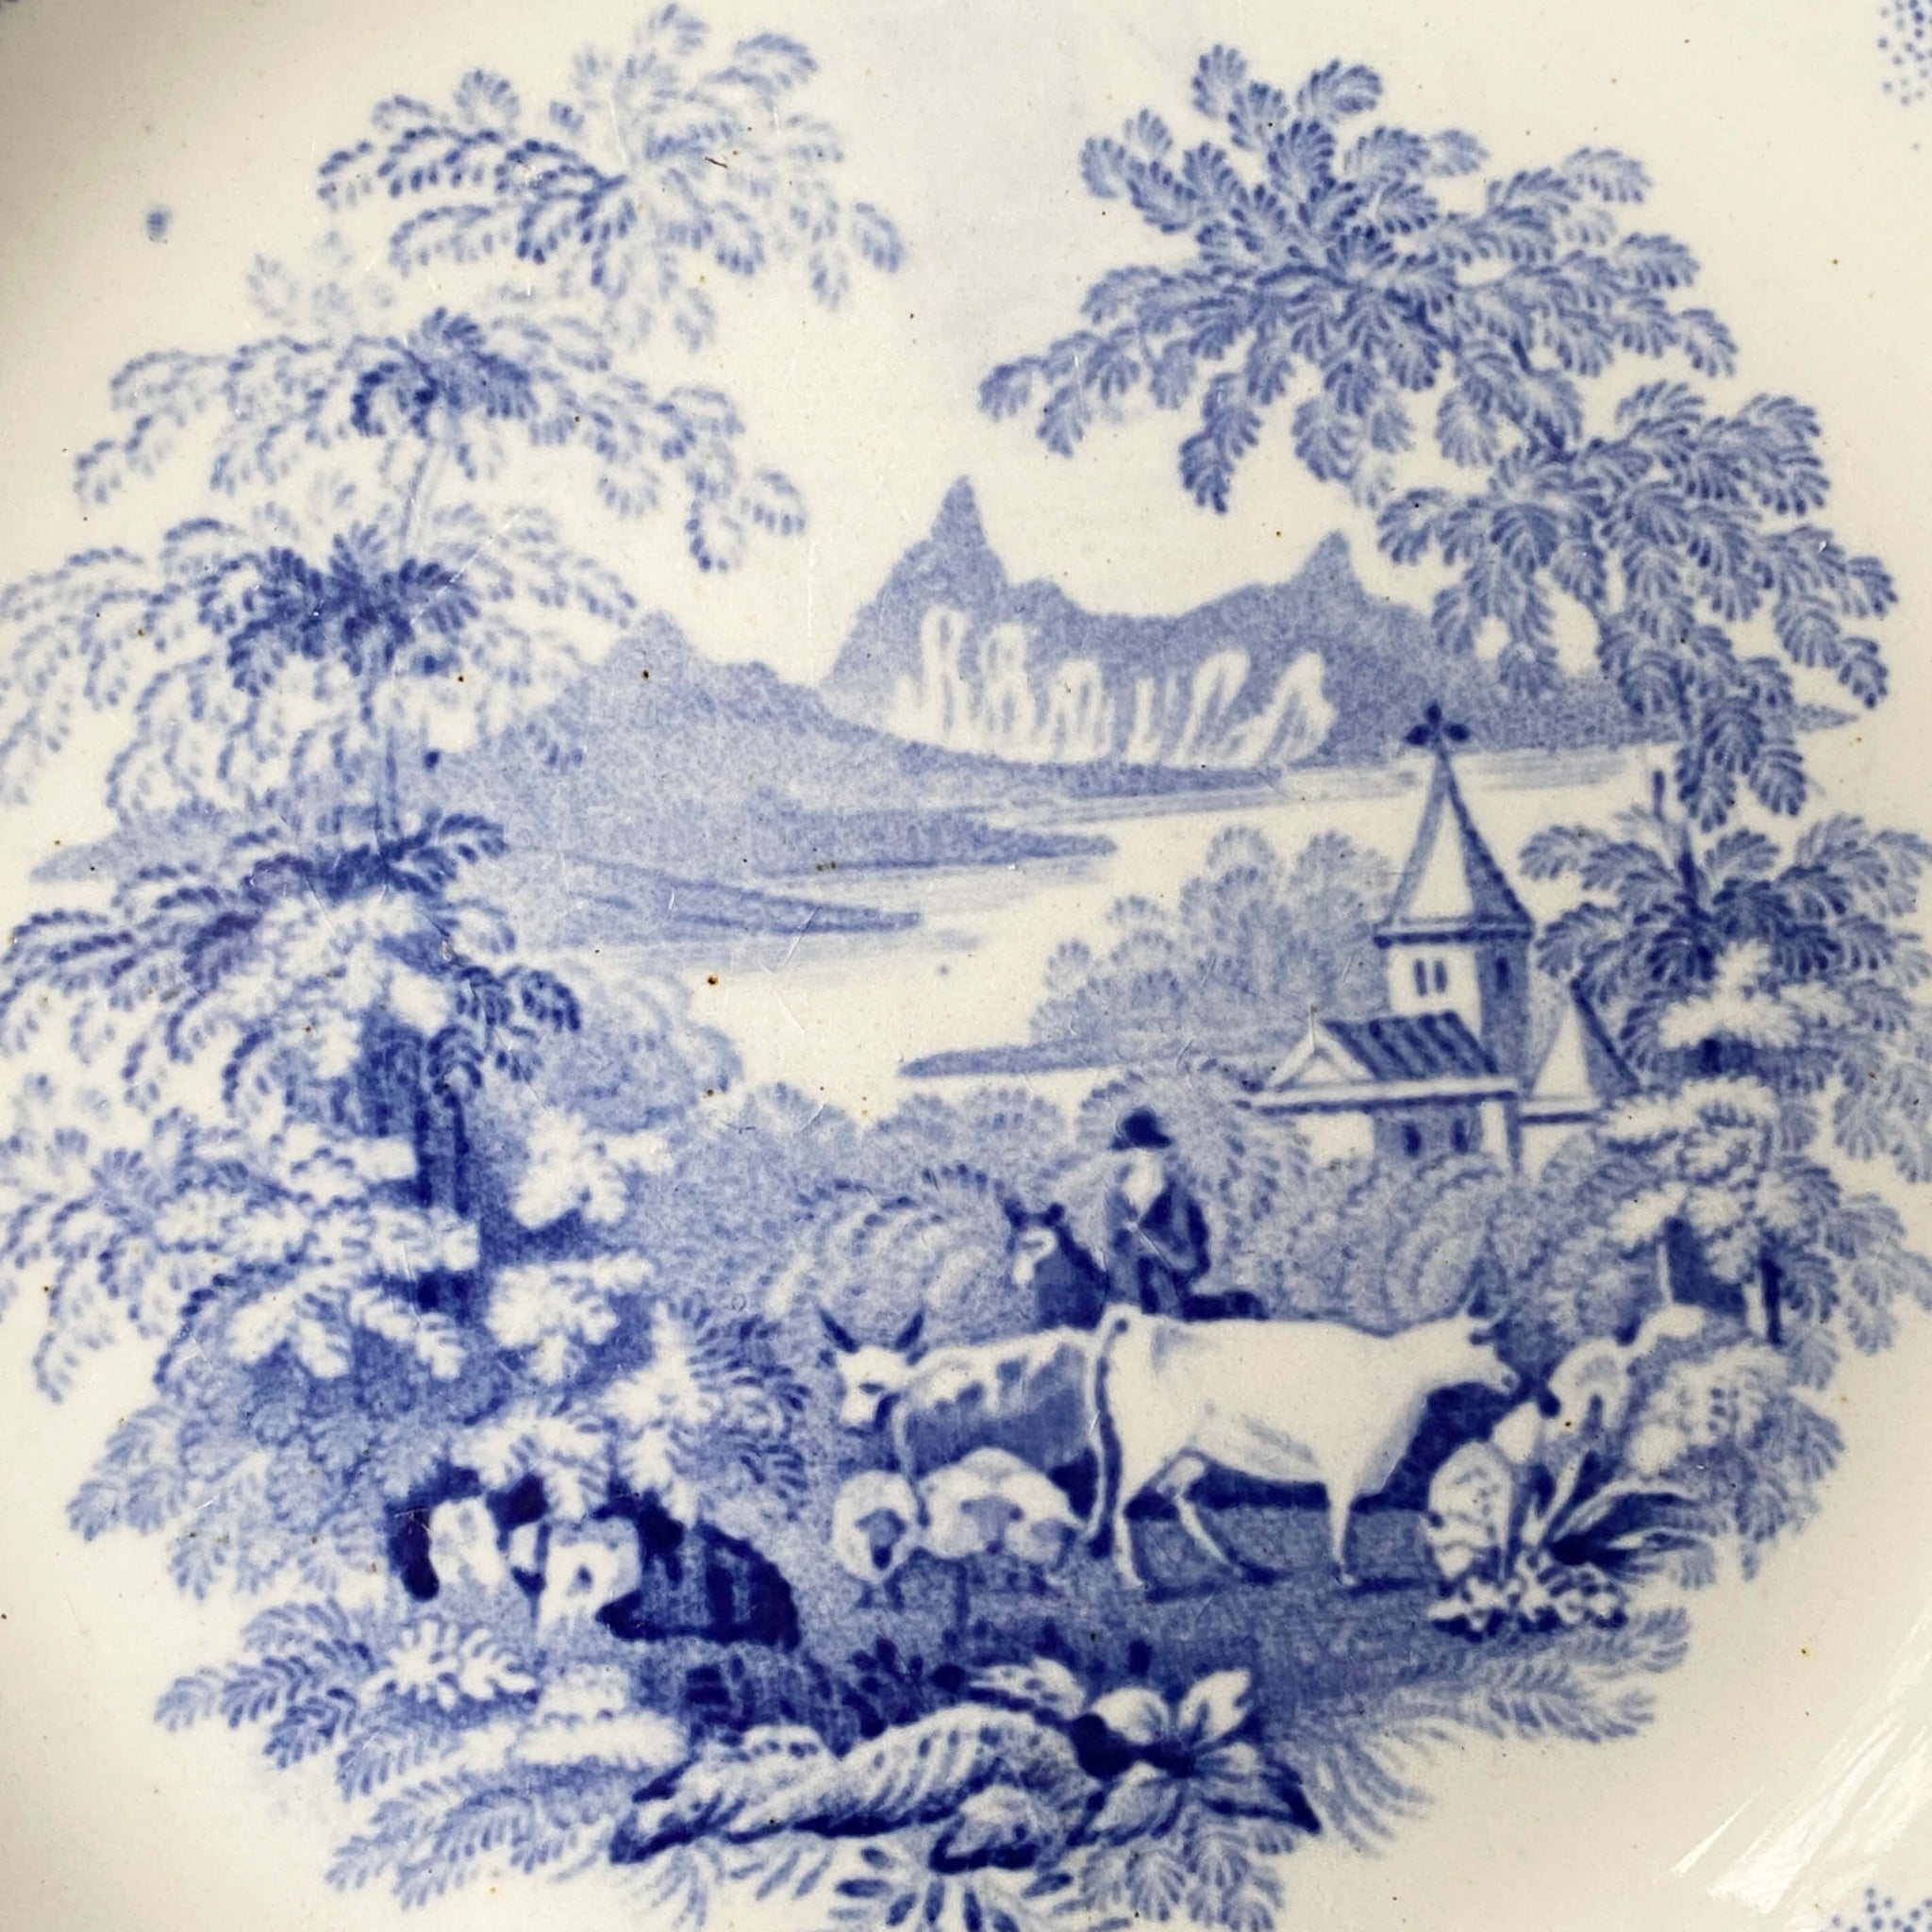 Rare Antique Staffordshire Bowl with Pastoral Landscape and Scroll Mark circa 1830s